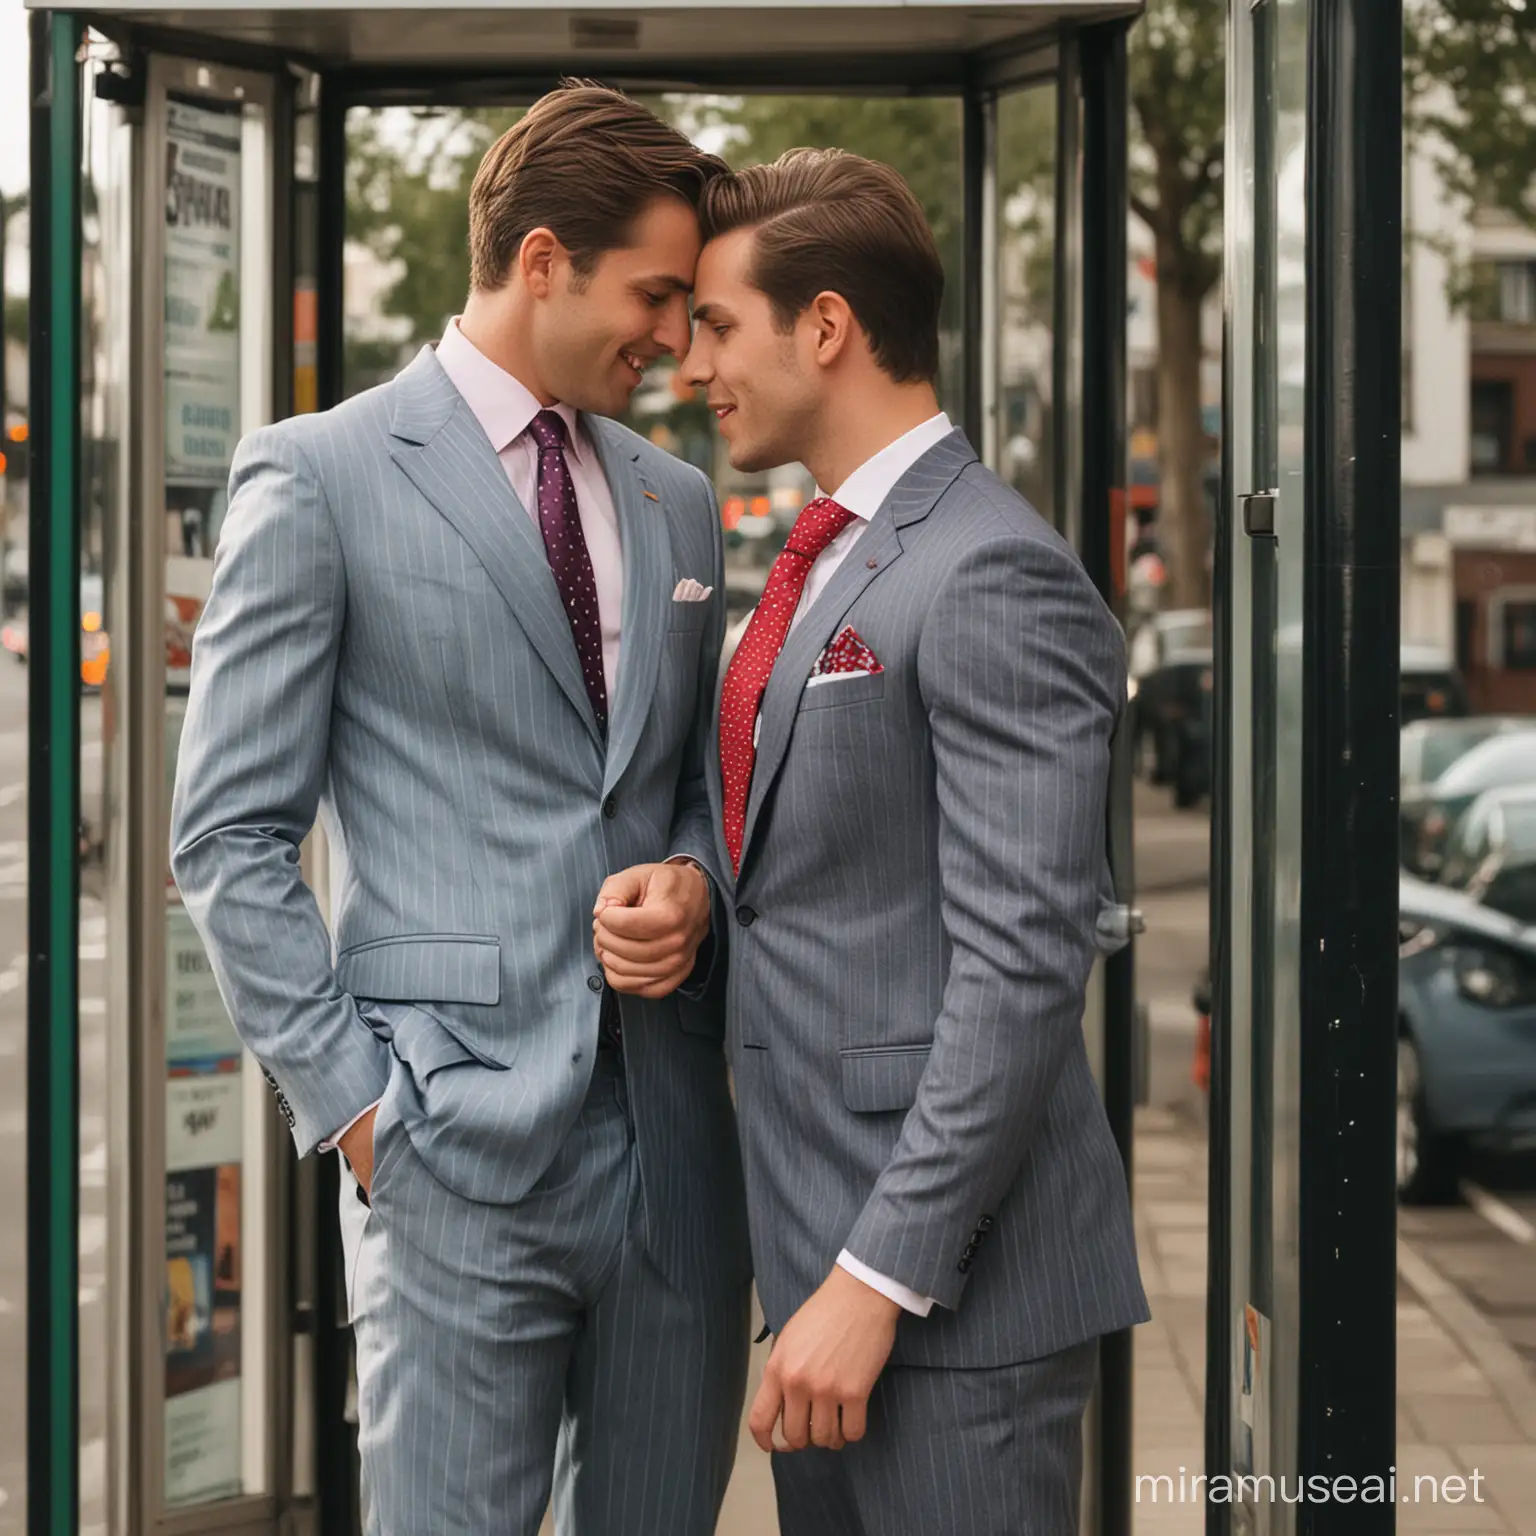 two men, standing at a bus stop, wearing bright pinstripe suit and tie, flirting